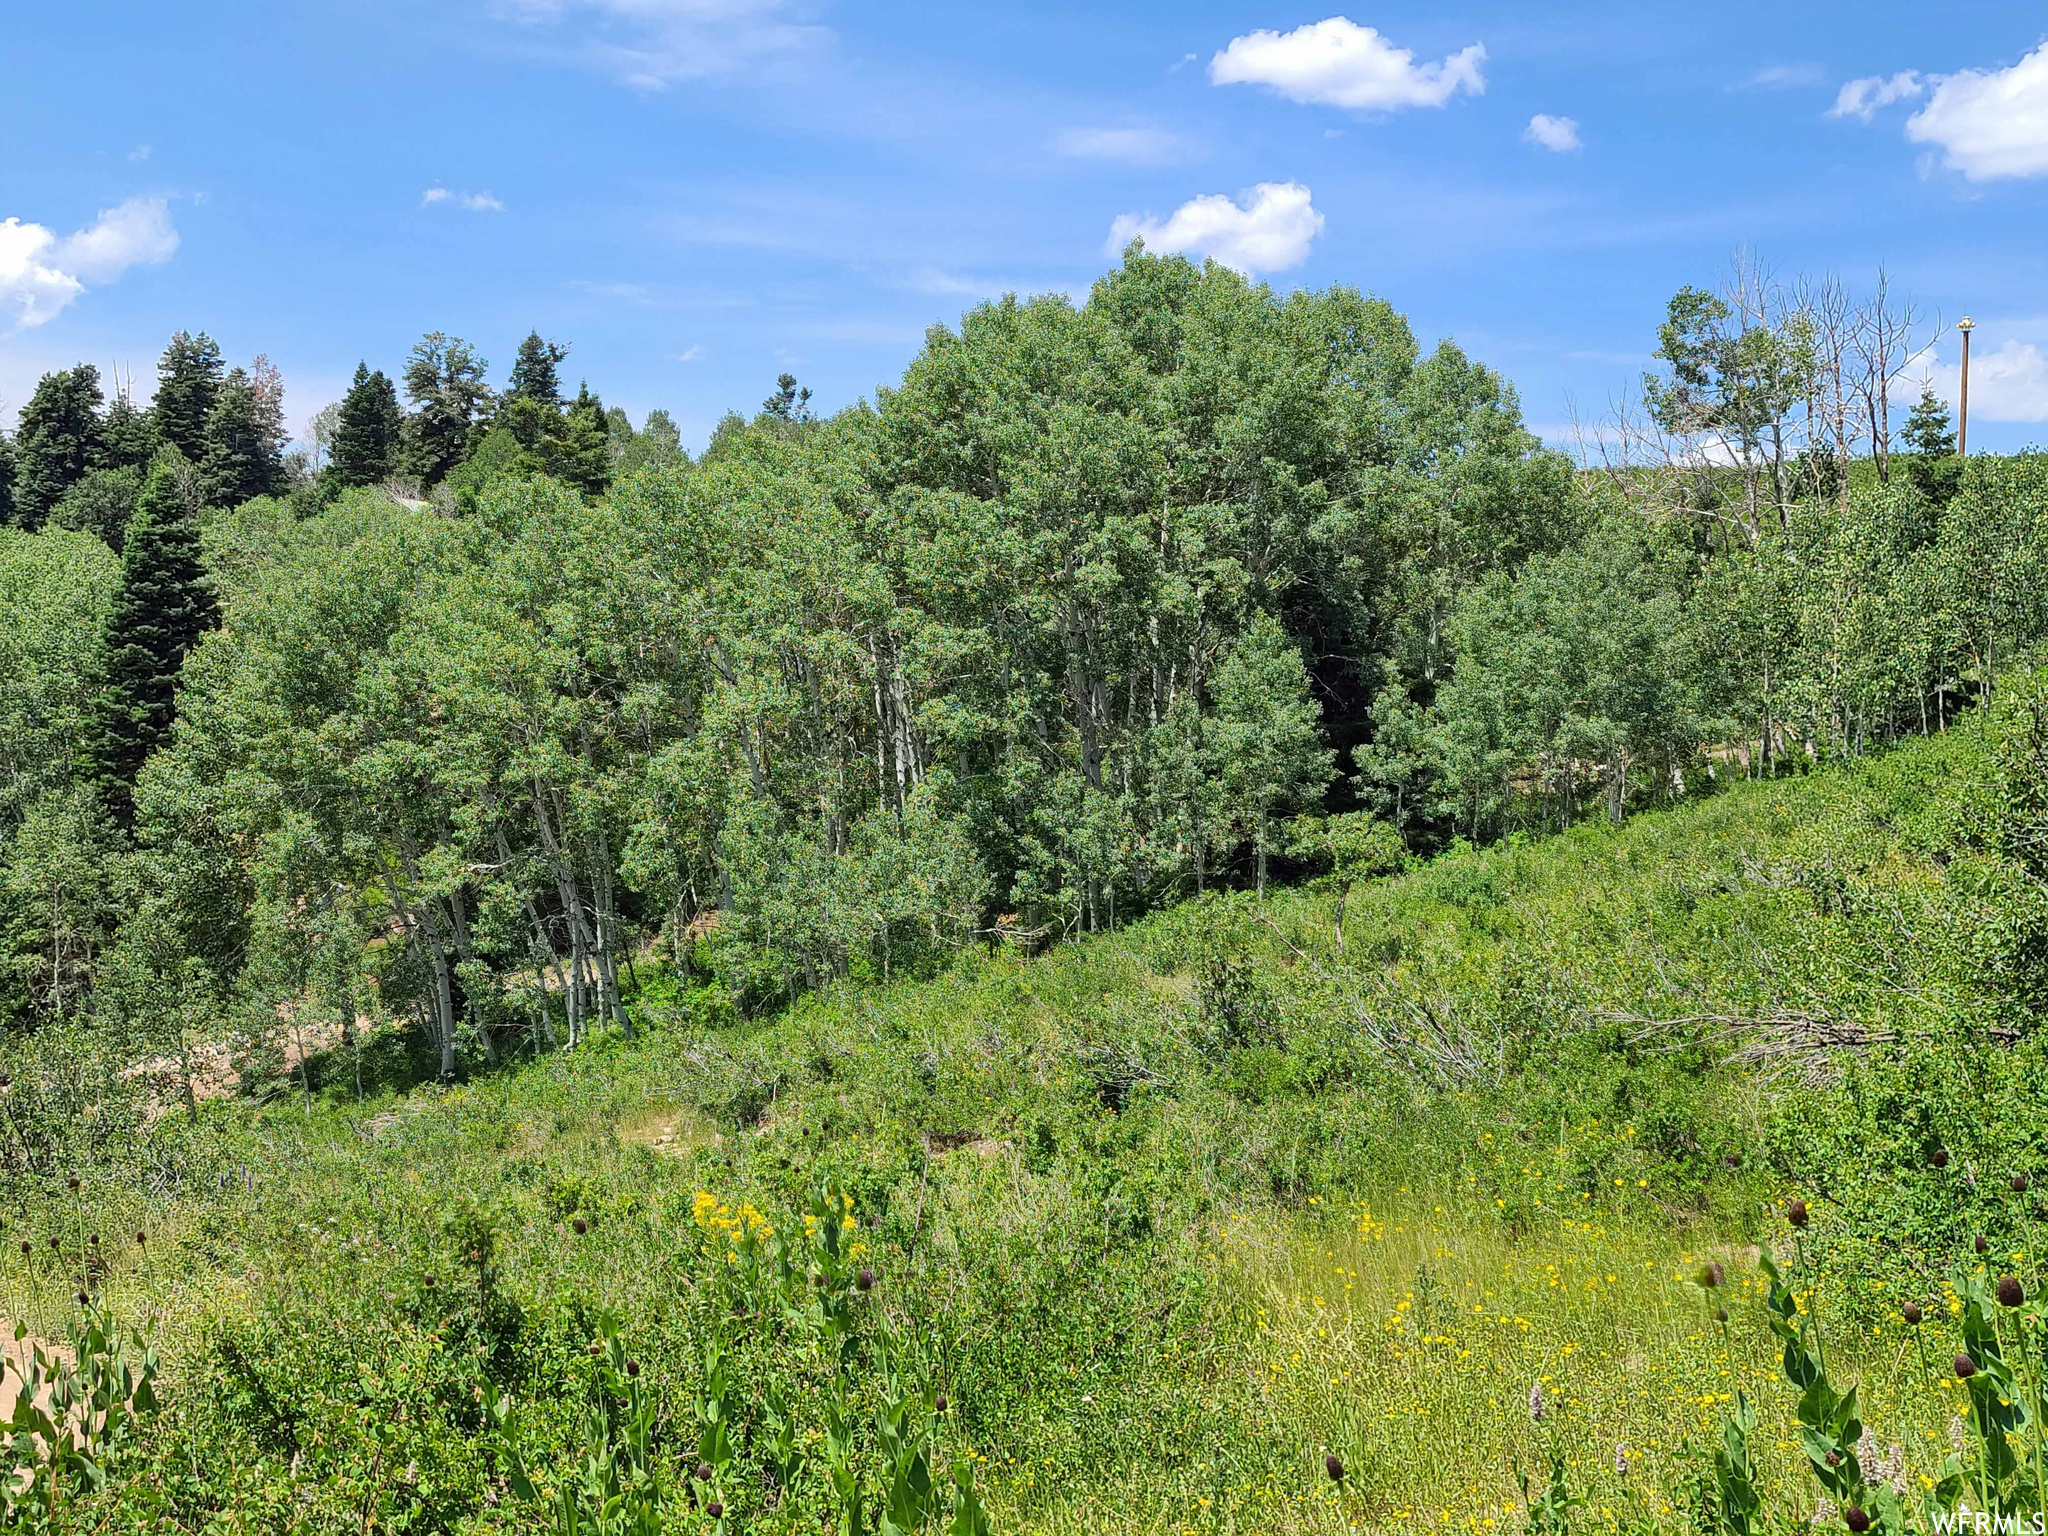 52 E OVER LOOK S #K52, Fairview, Utah 84629, ,Land,For sale,OVER LOOK,1872630